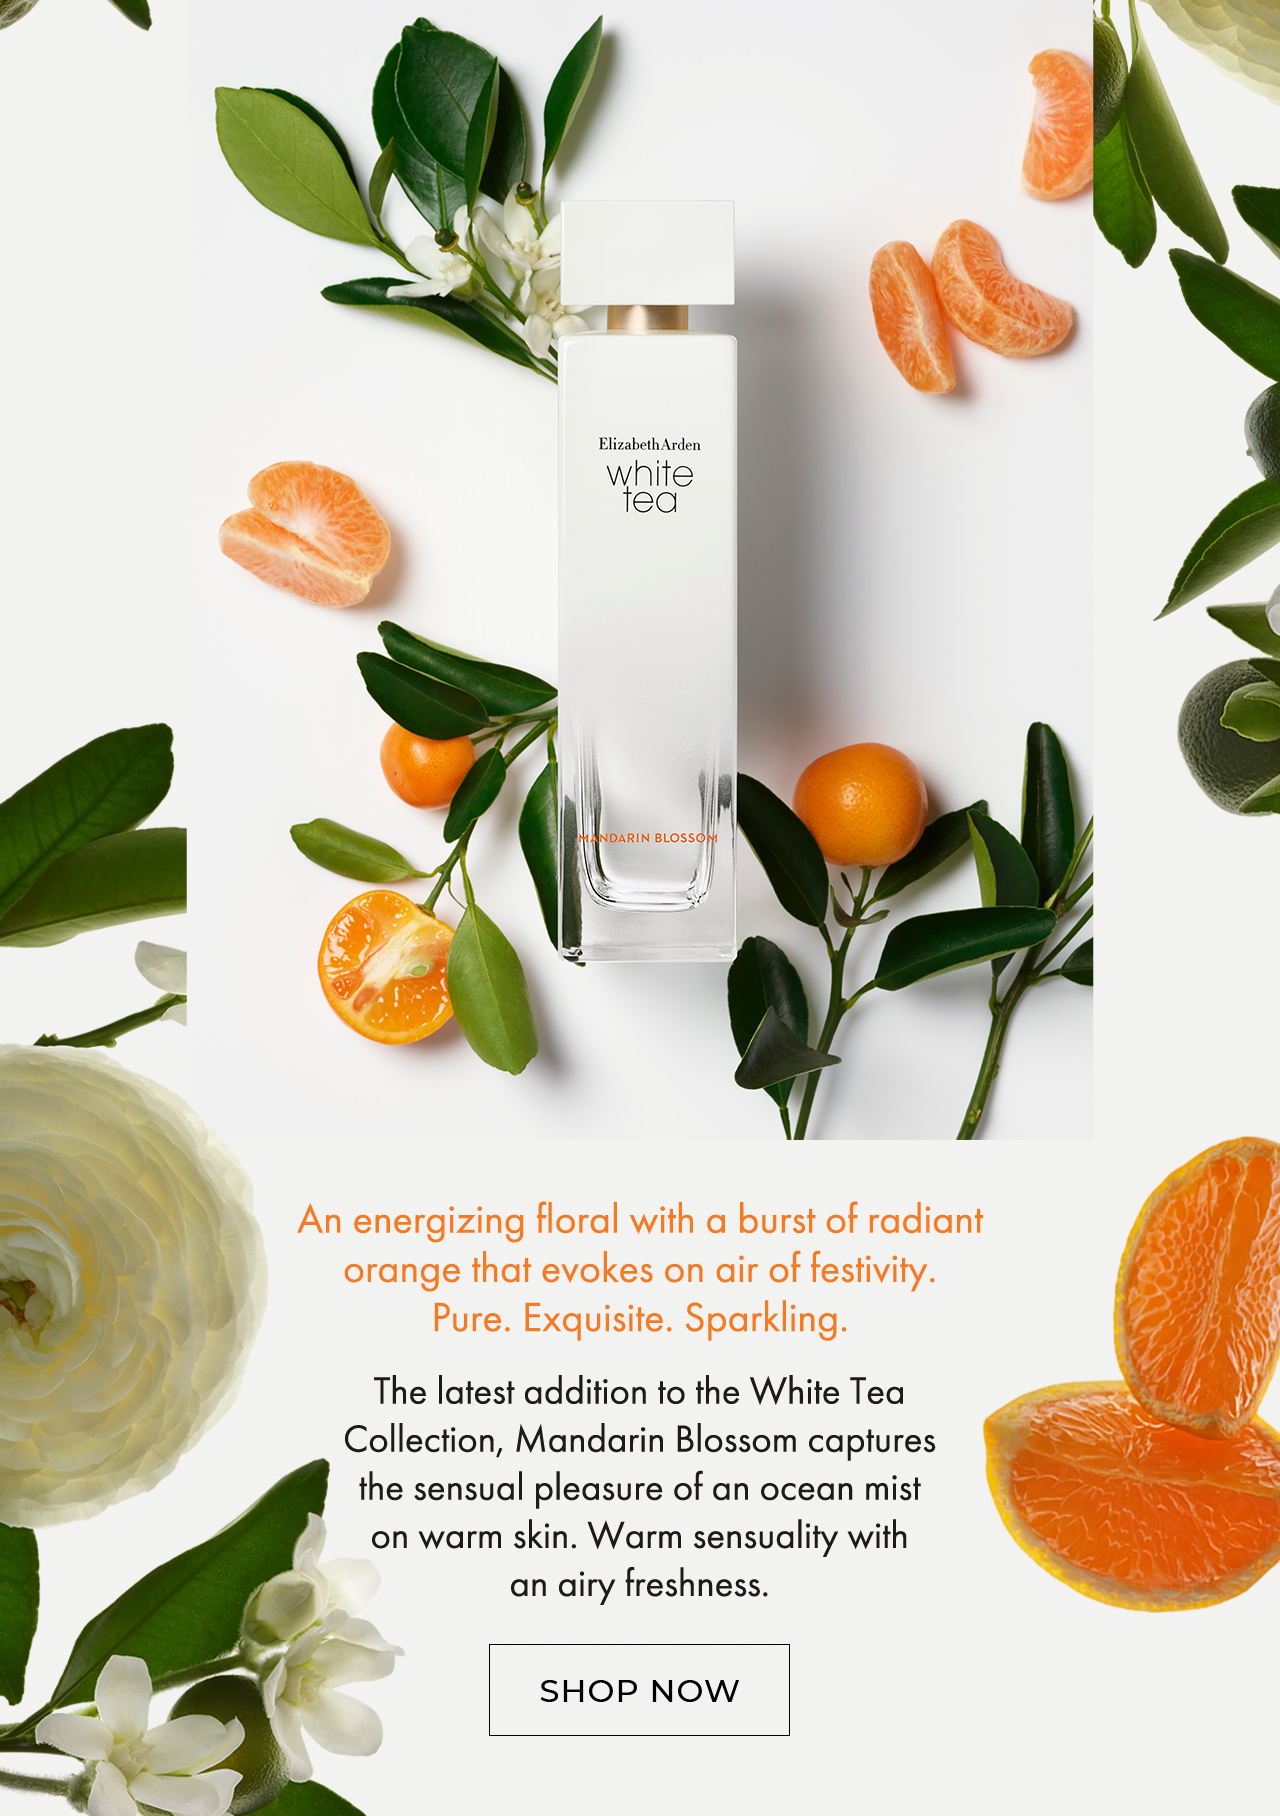 An energizing floral with a burst of radiant orange that evokes on air of festivity. Pure. Exquisite. Sparkling. SHOP NOW